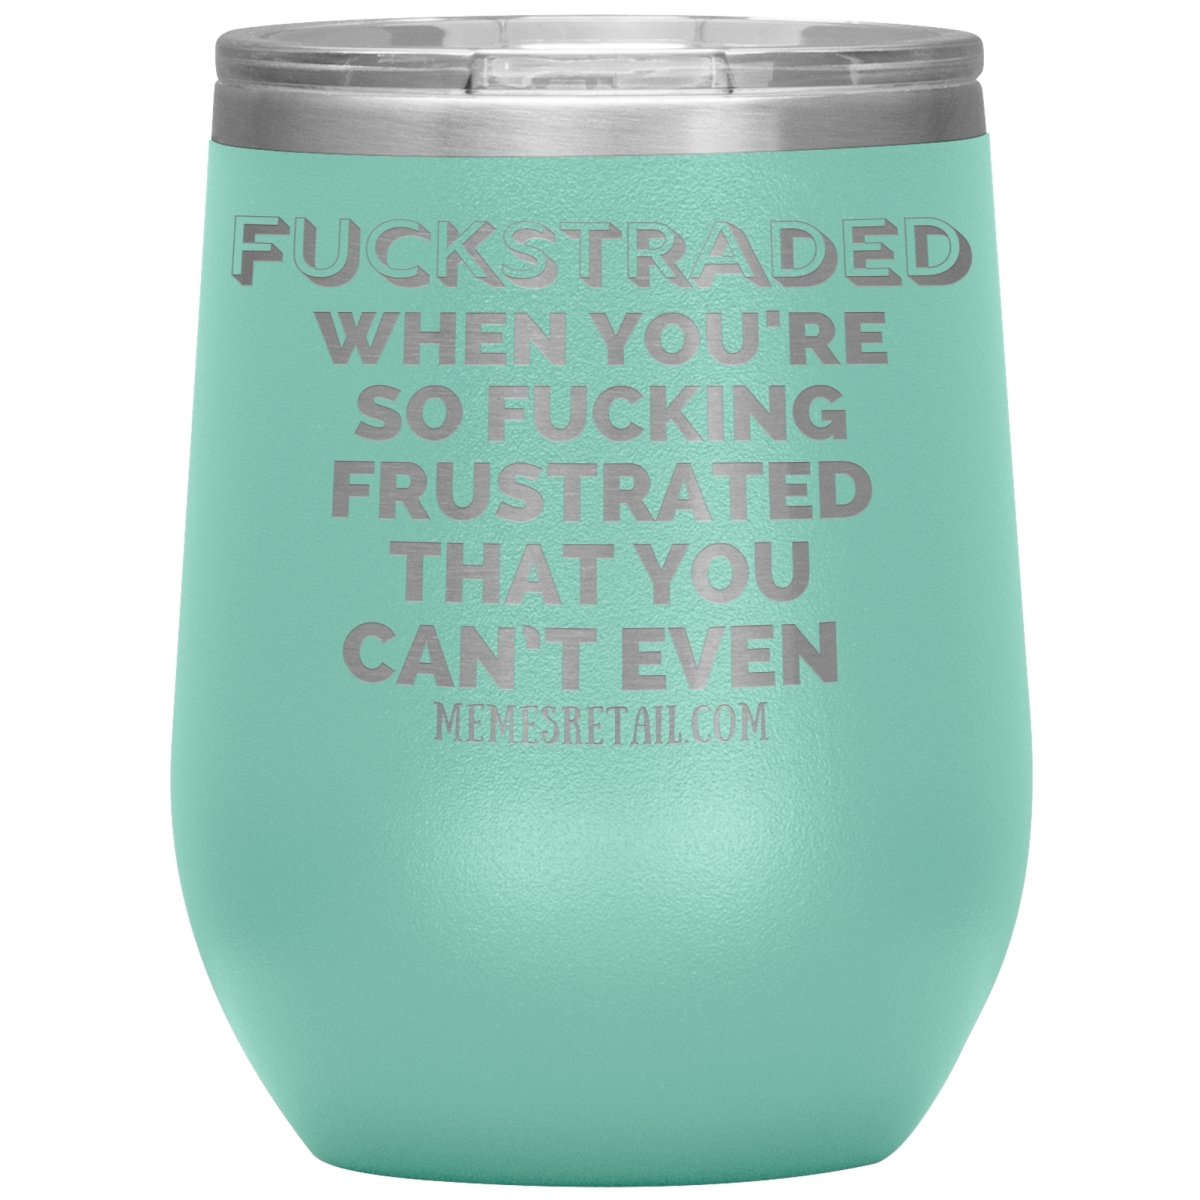 Fuckstraded, When You're So Fucking Frustrated That You Can’t Even Tumblers, 12oz Wine Insulated Tumbler / Teal - MemesRetail.com